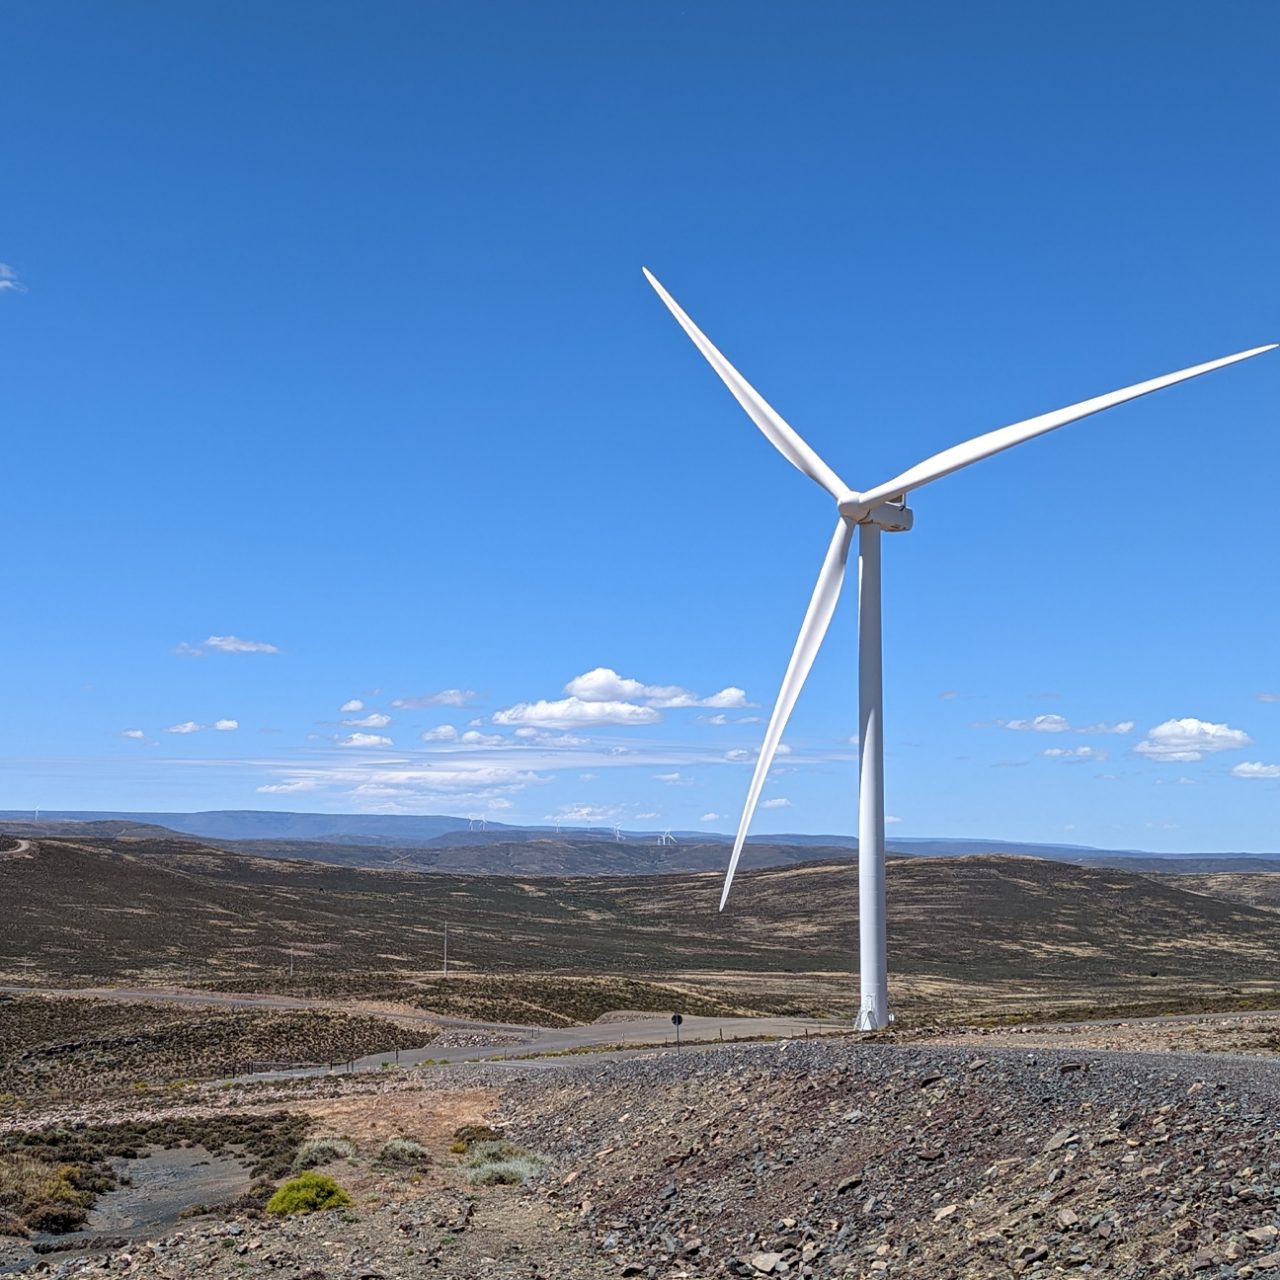 UKCI | Onshore wind in South Africa